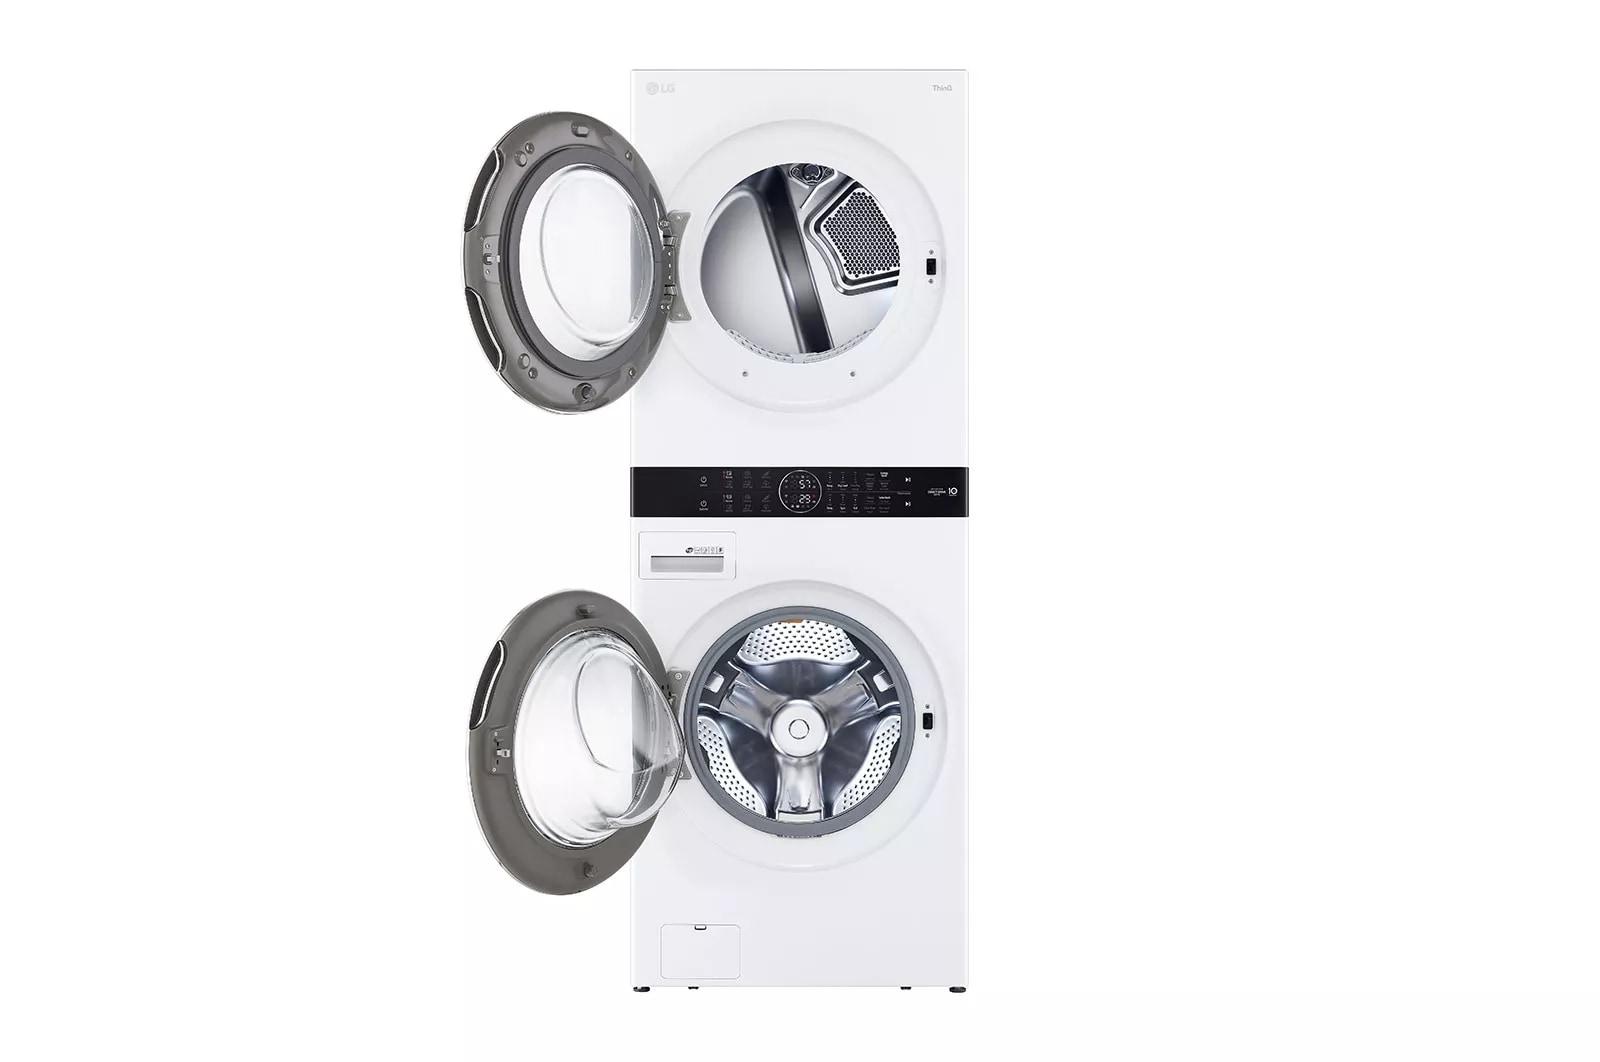 LG Electric Washer Tower - image 4 of 6